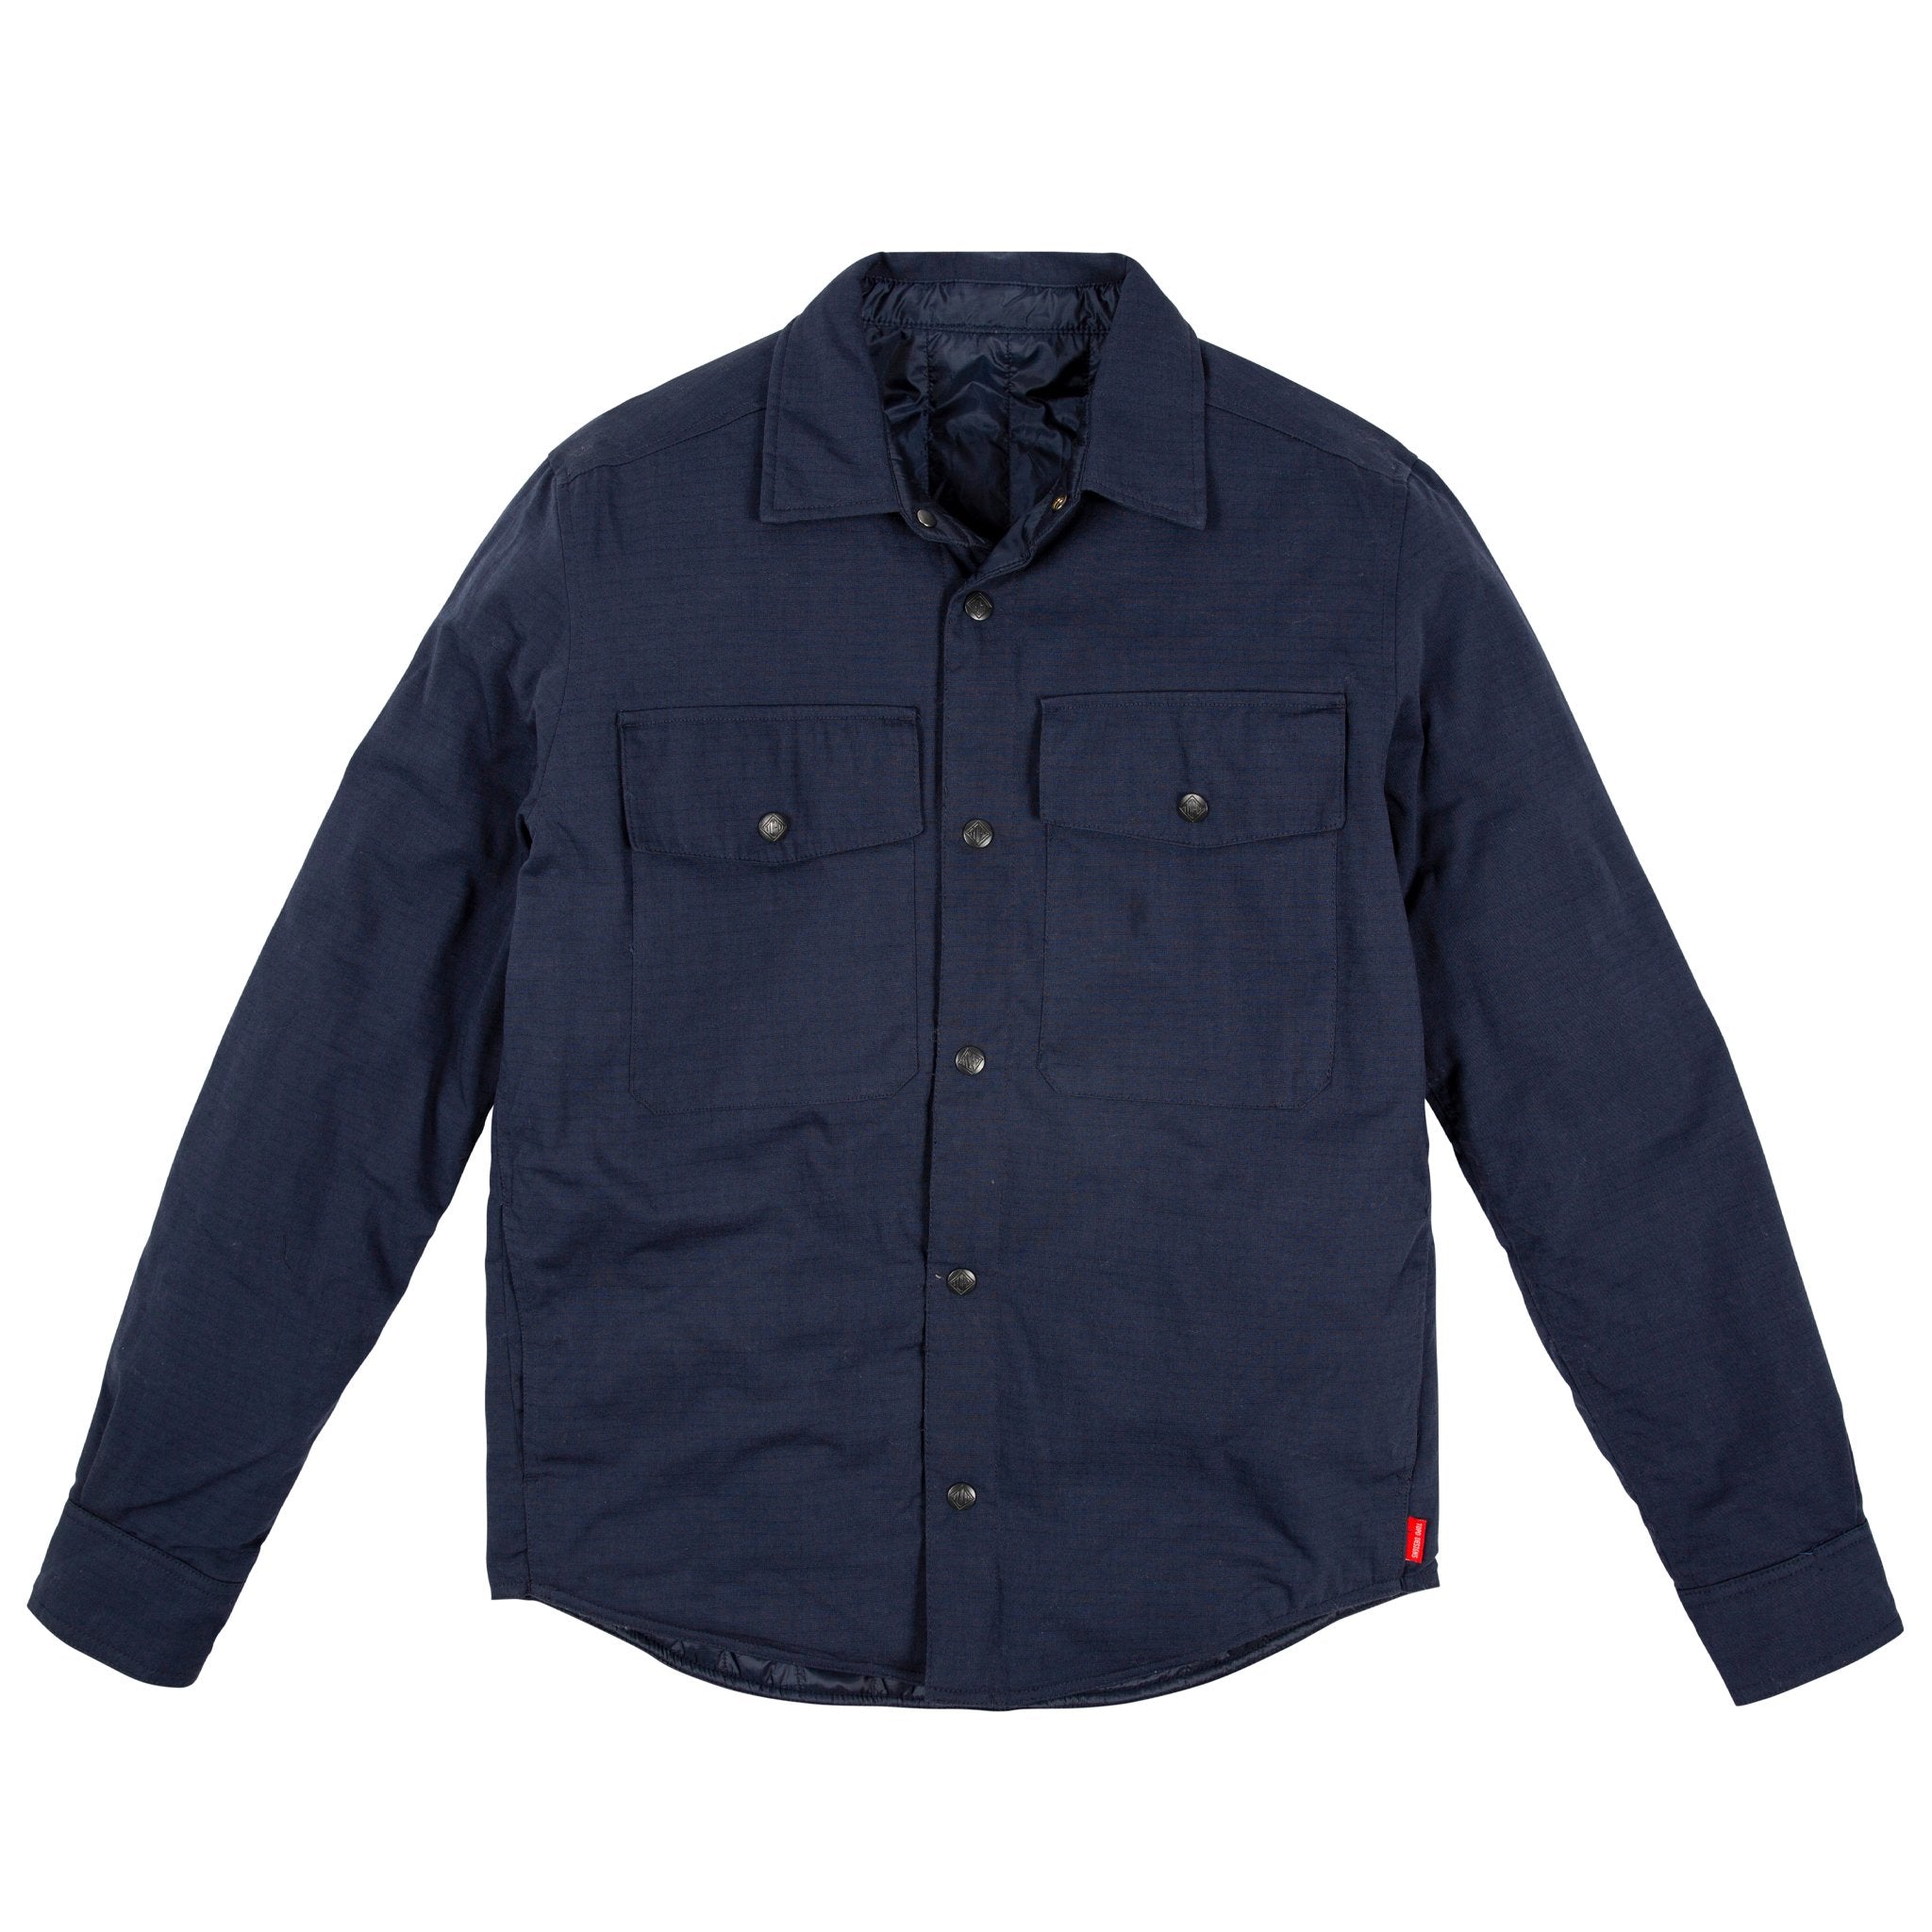 Veste-chemise Insulated - Homme – Topo Designs - Europe